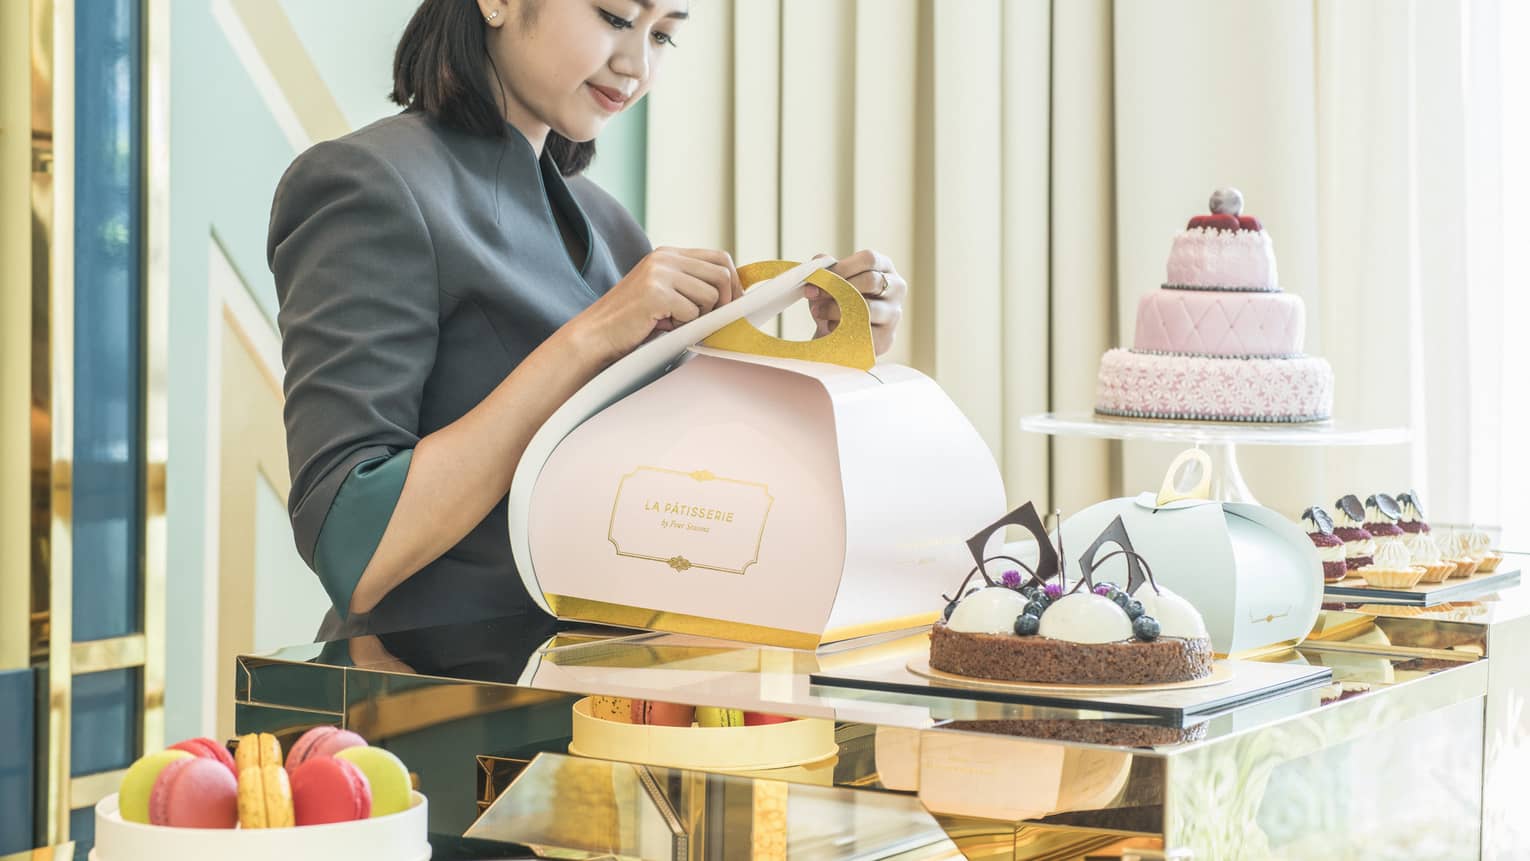 Woman wrapping a pastry in a stylish light pink box for take away